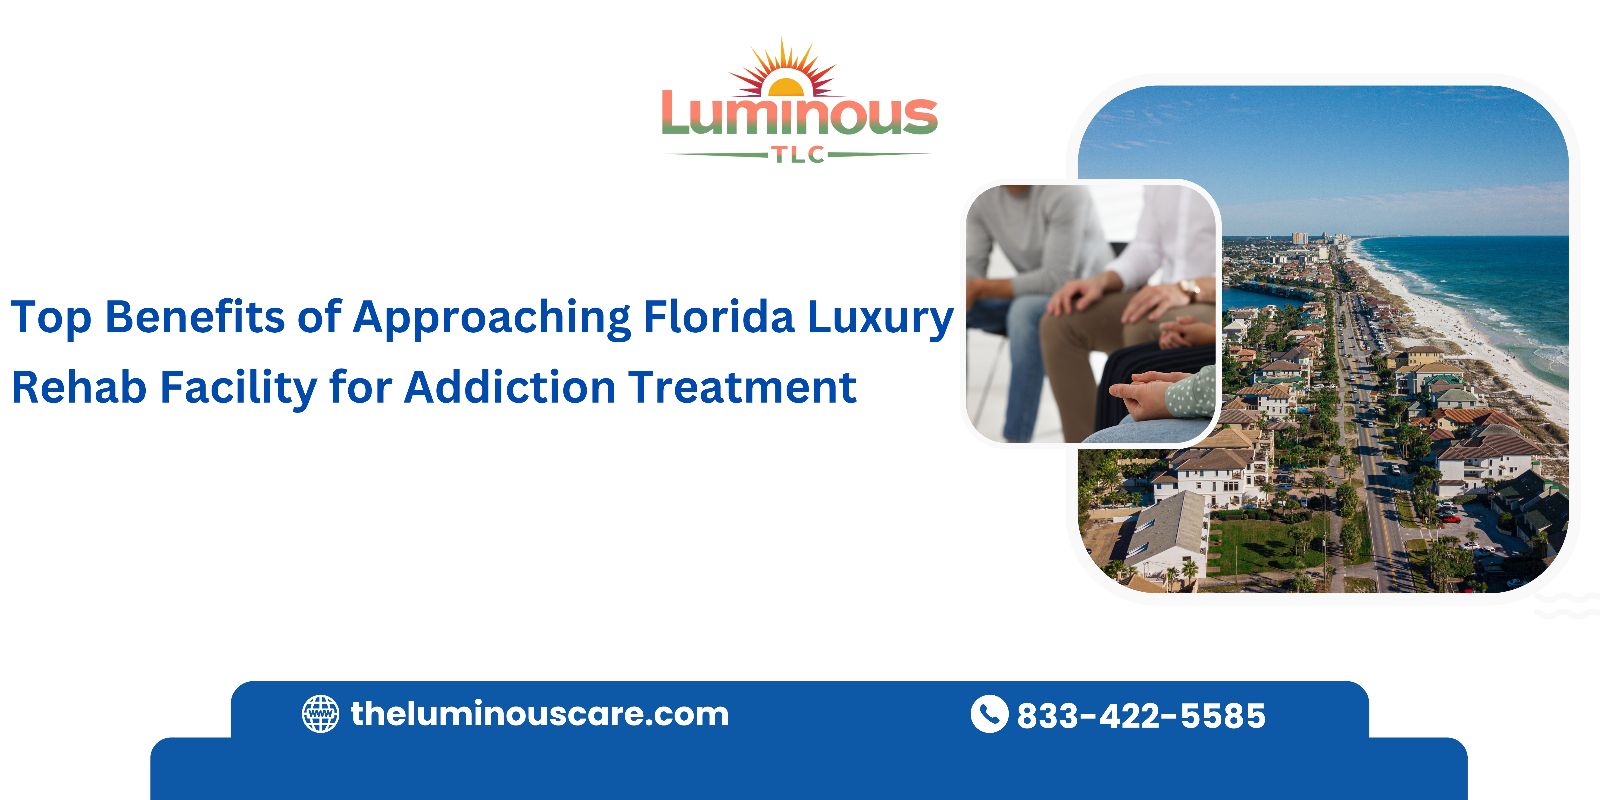 Top Benefits of Approaching Florida Luxury Rehab Facility for Addiction Treatment